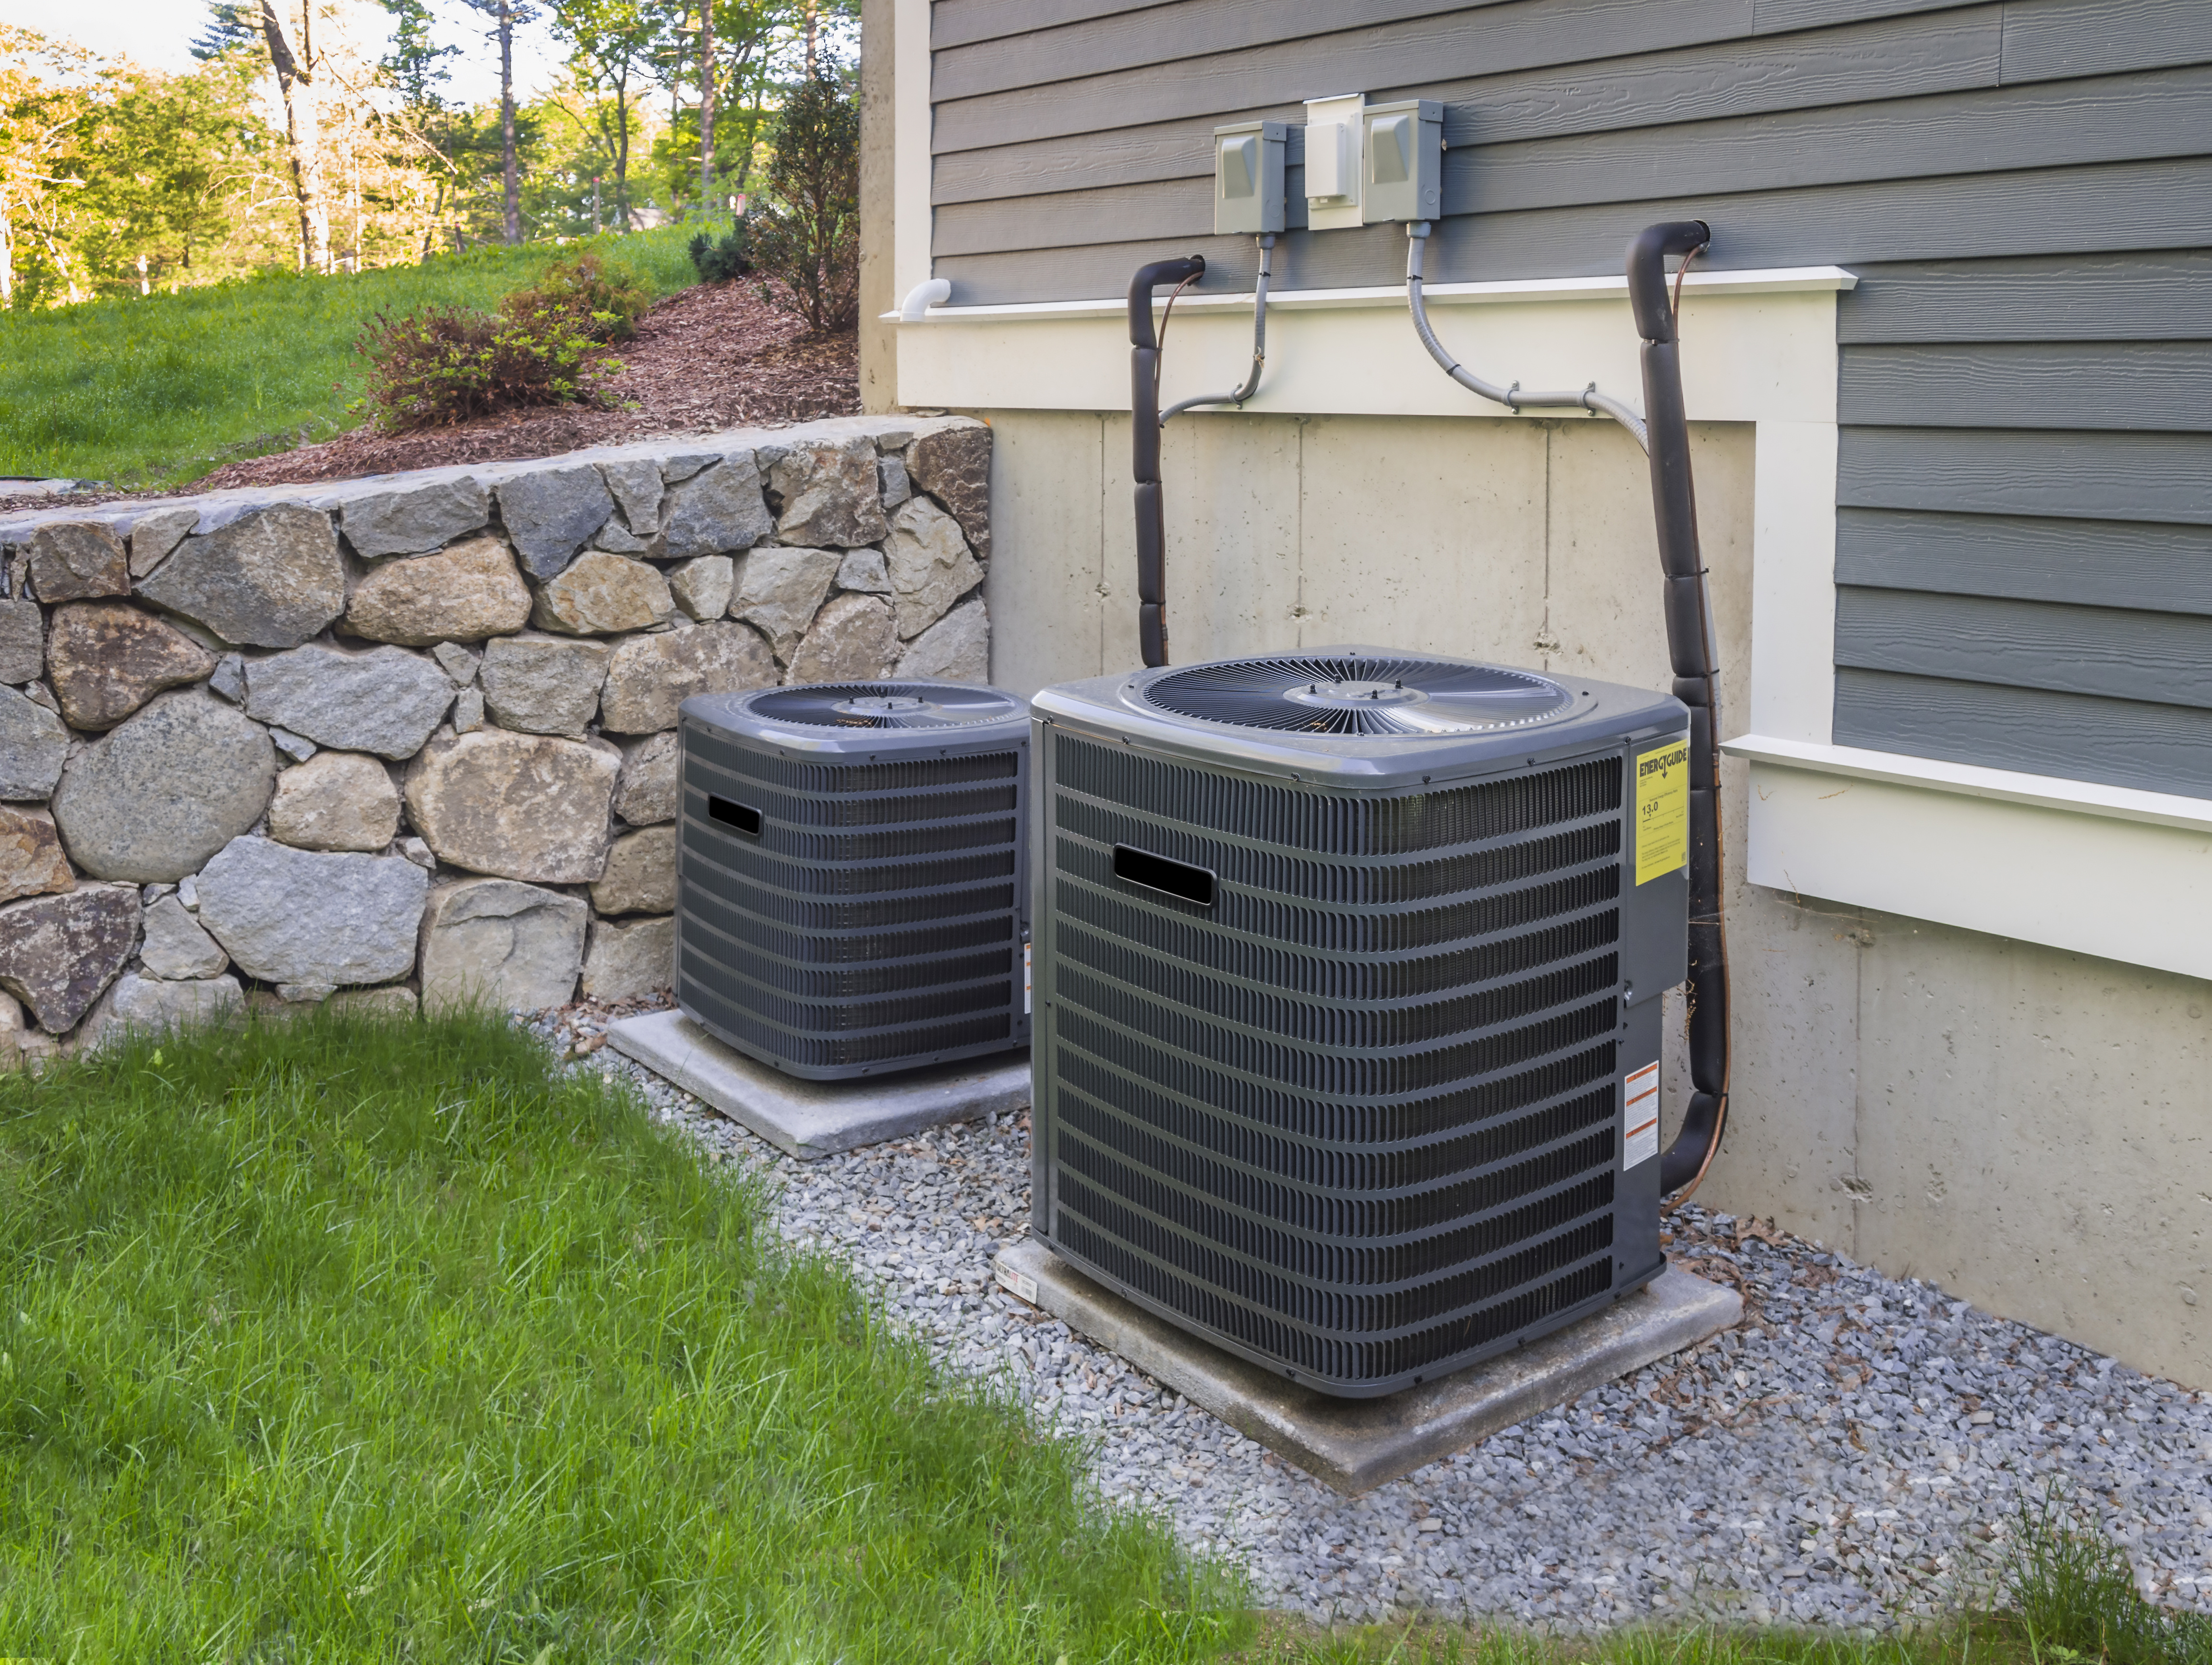 What you must know about your HVAC system